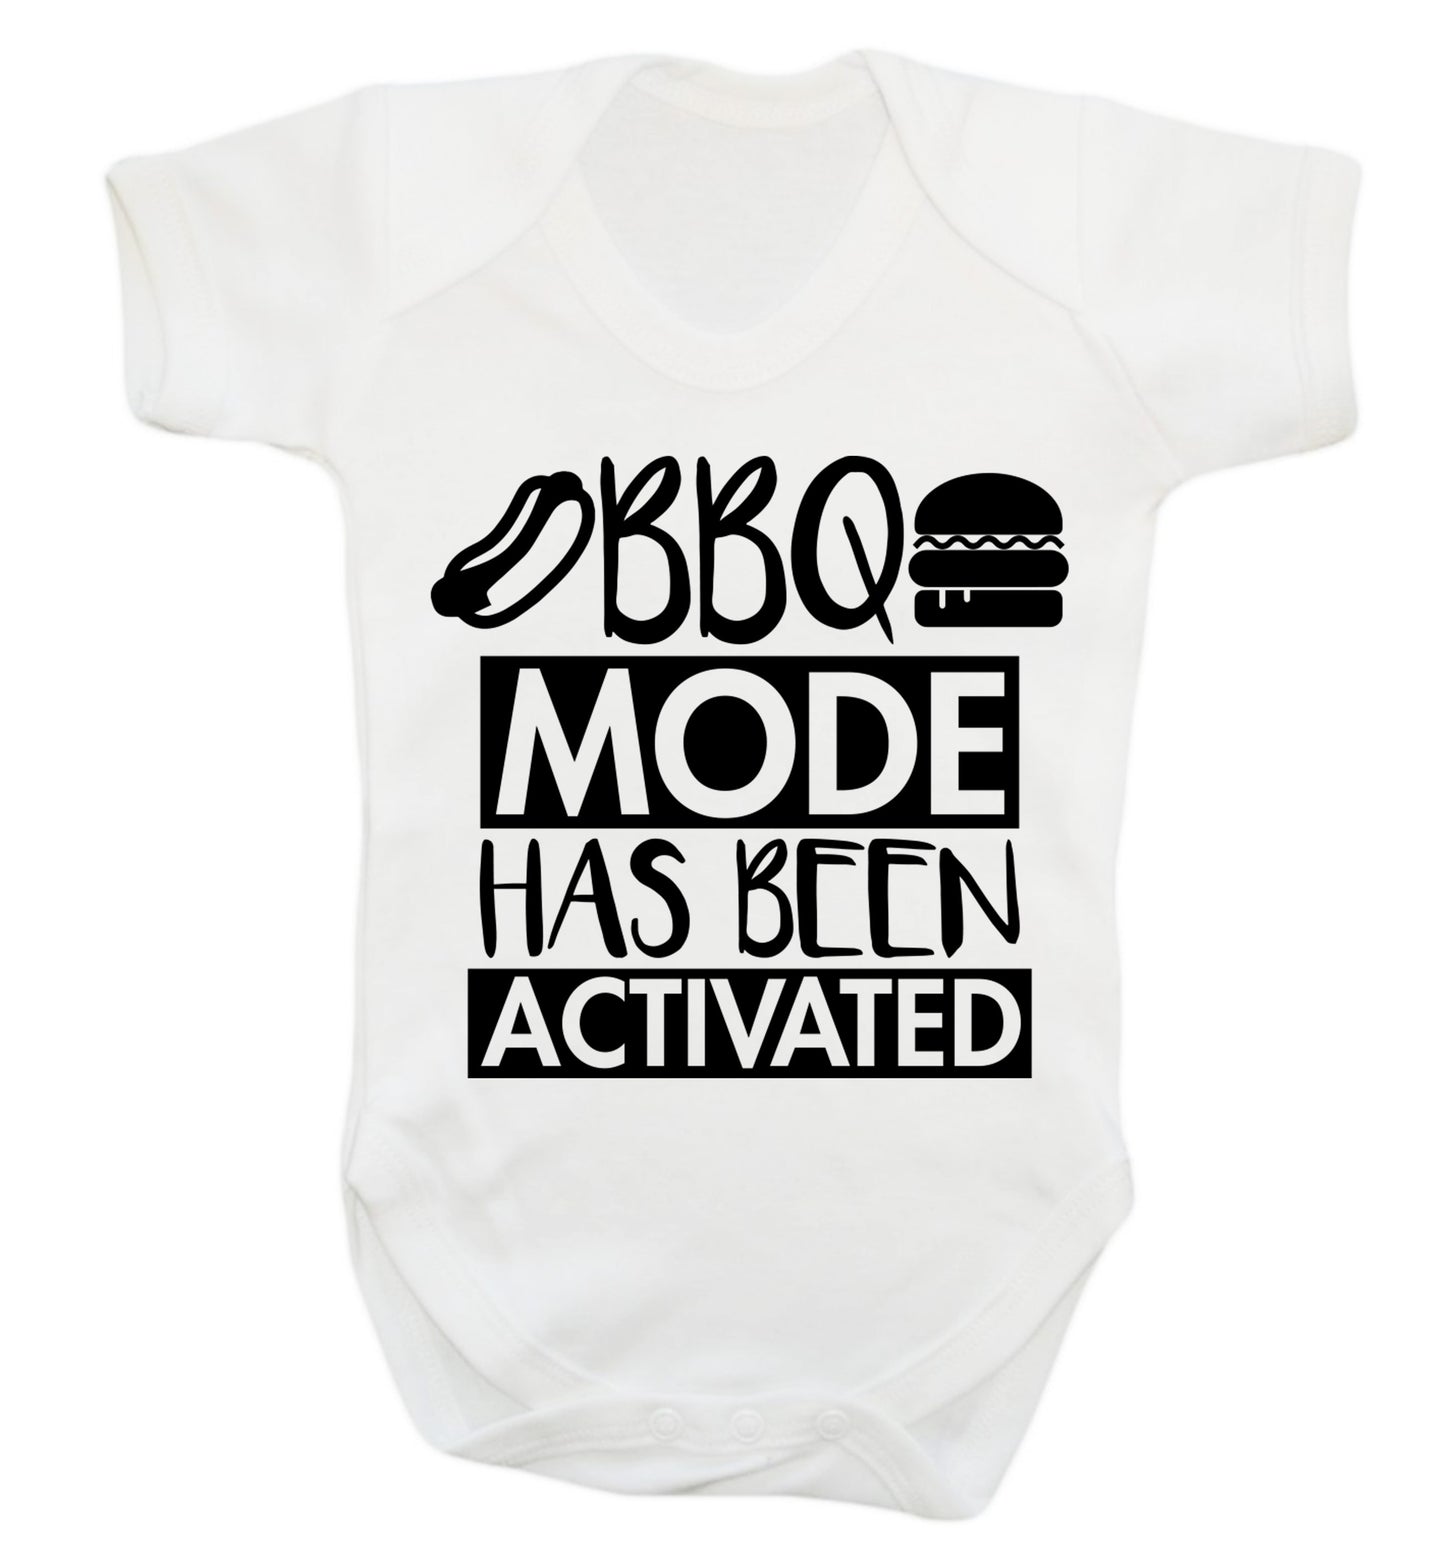 Bbq mode has been activated Baby Vest white 18-24 months